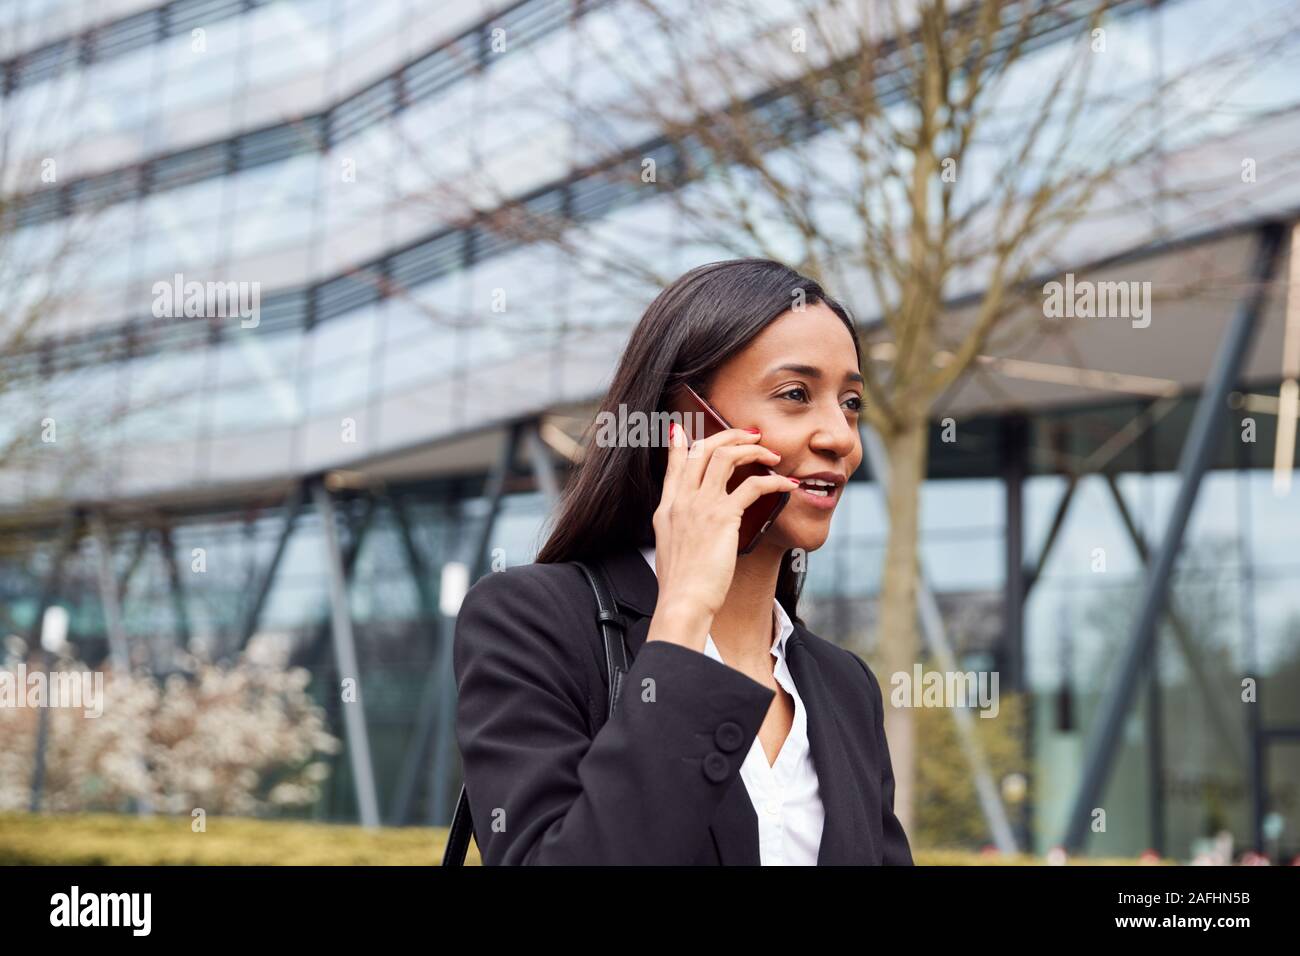 Businesswoman Commuting To Work Talking On Mobile Phone Outside Modern Office Building Stock Photo